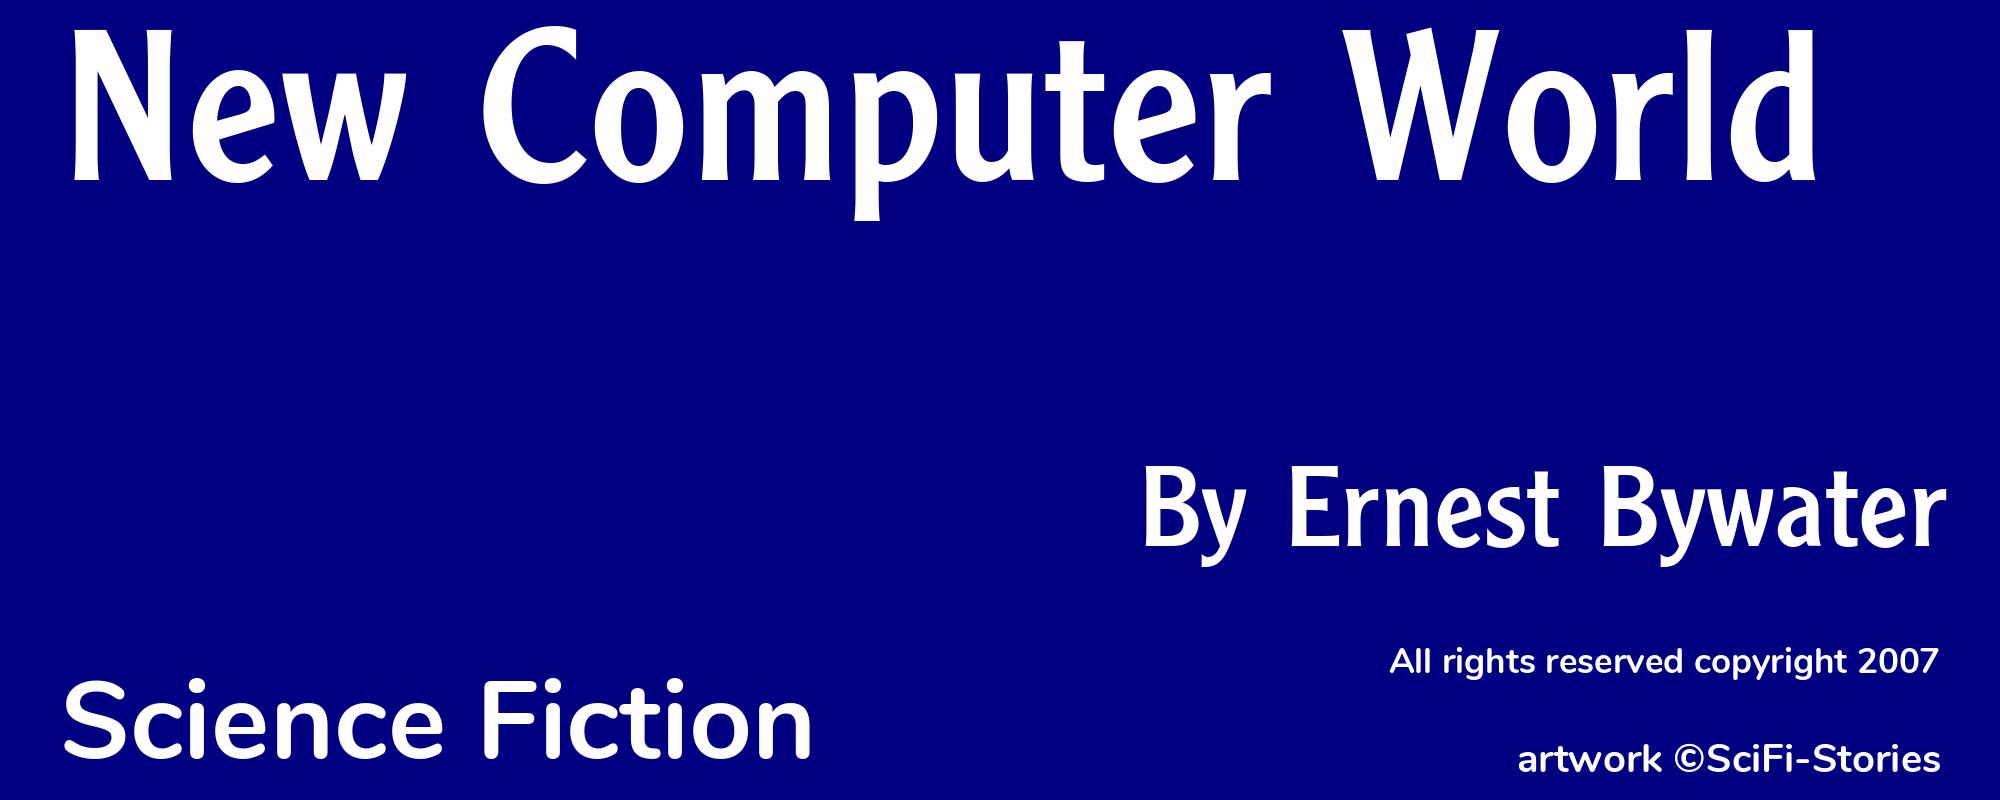 New Computer World - Cover